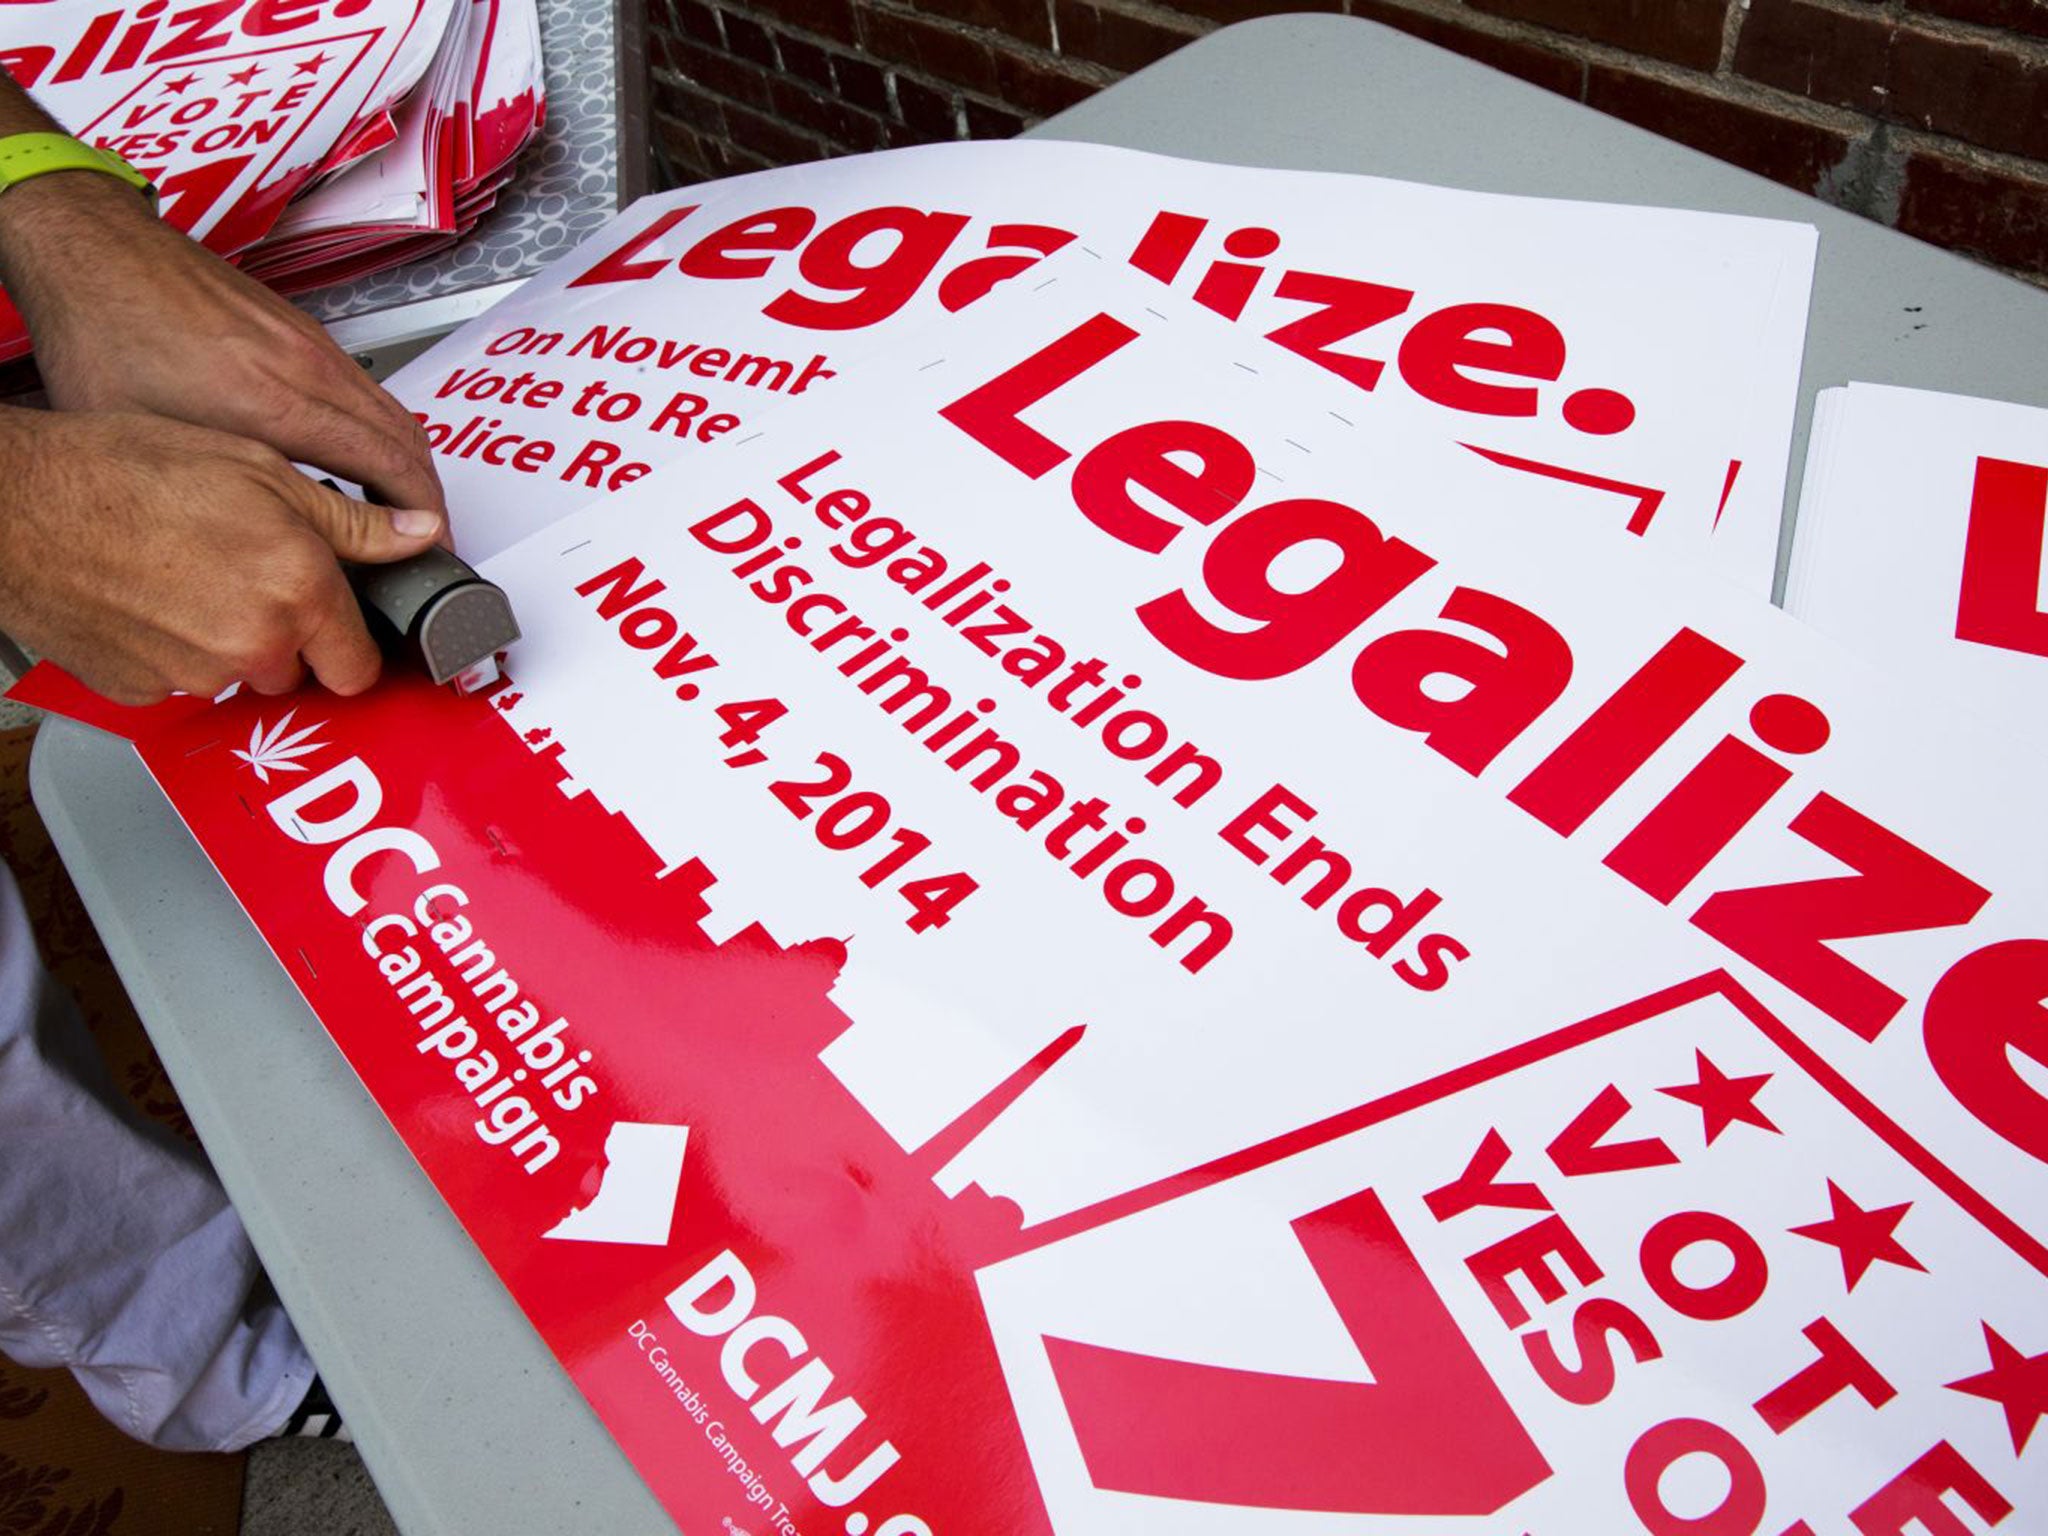 Marijuana campaigners in DC get signs ready ahead of vote